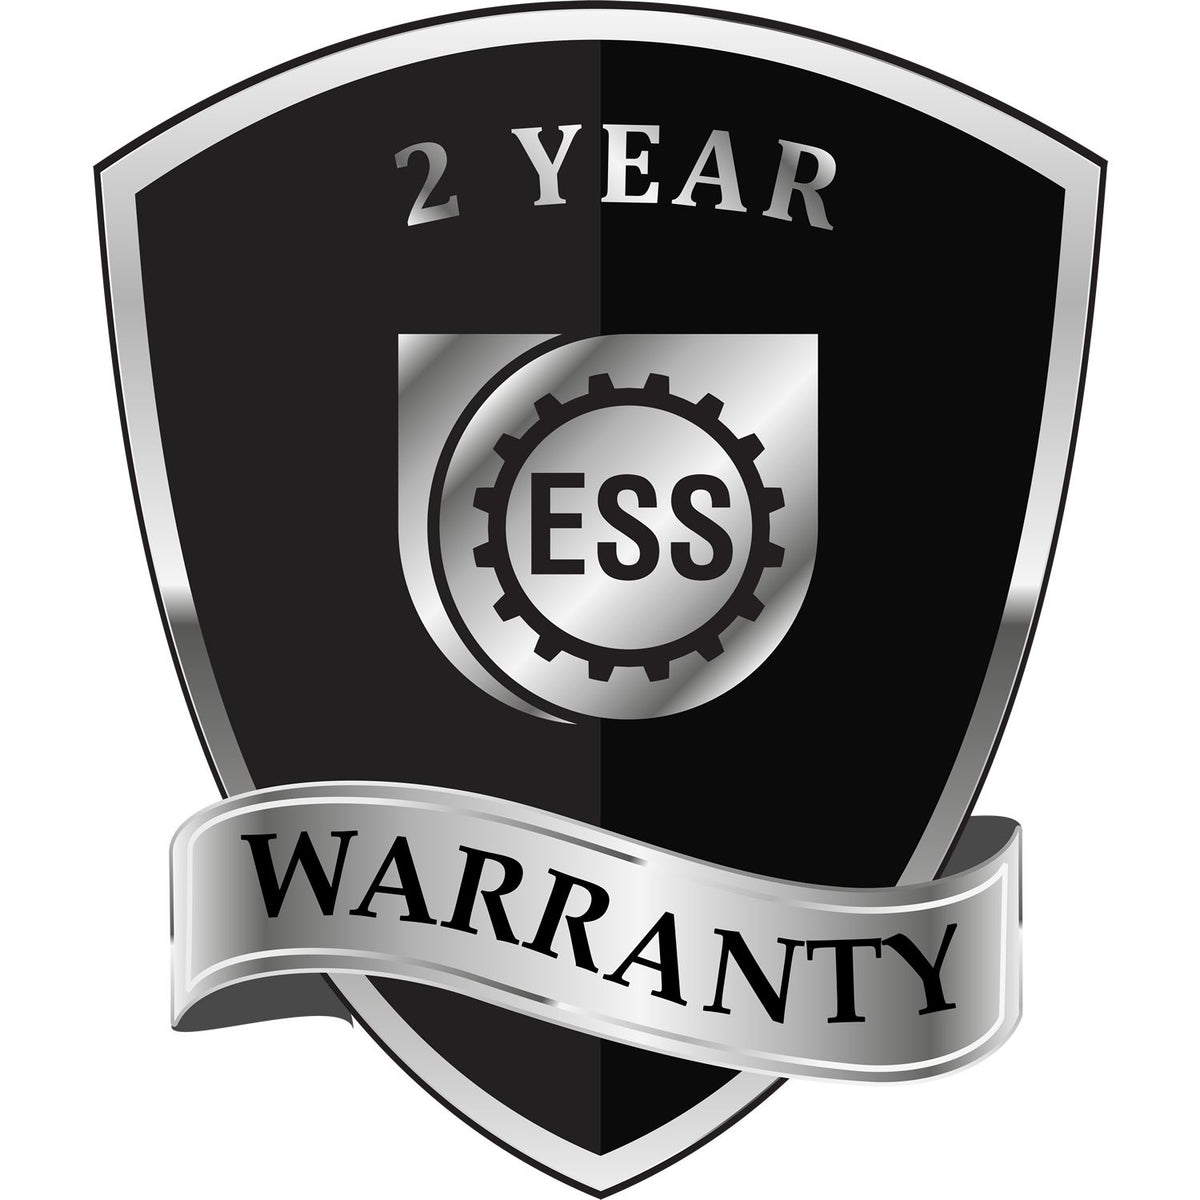 A black and silver badge or emblem showing warranty information for the Soft Florida Professional Geologist Seal